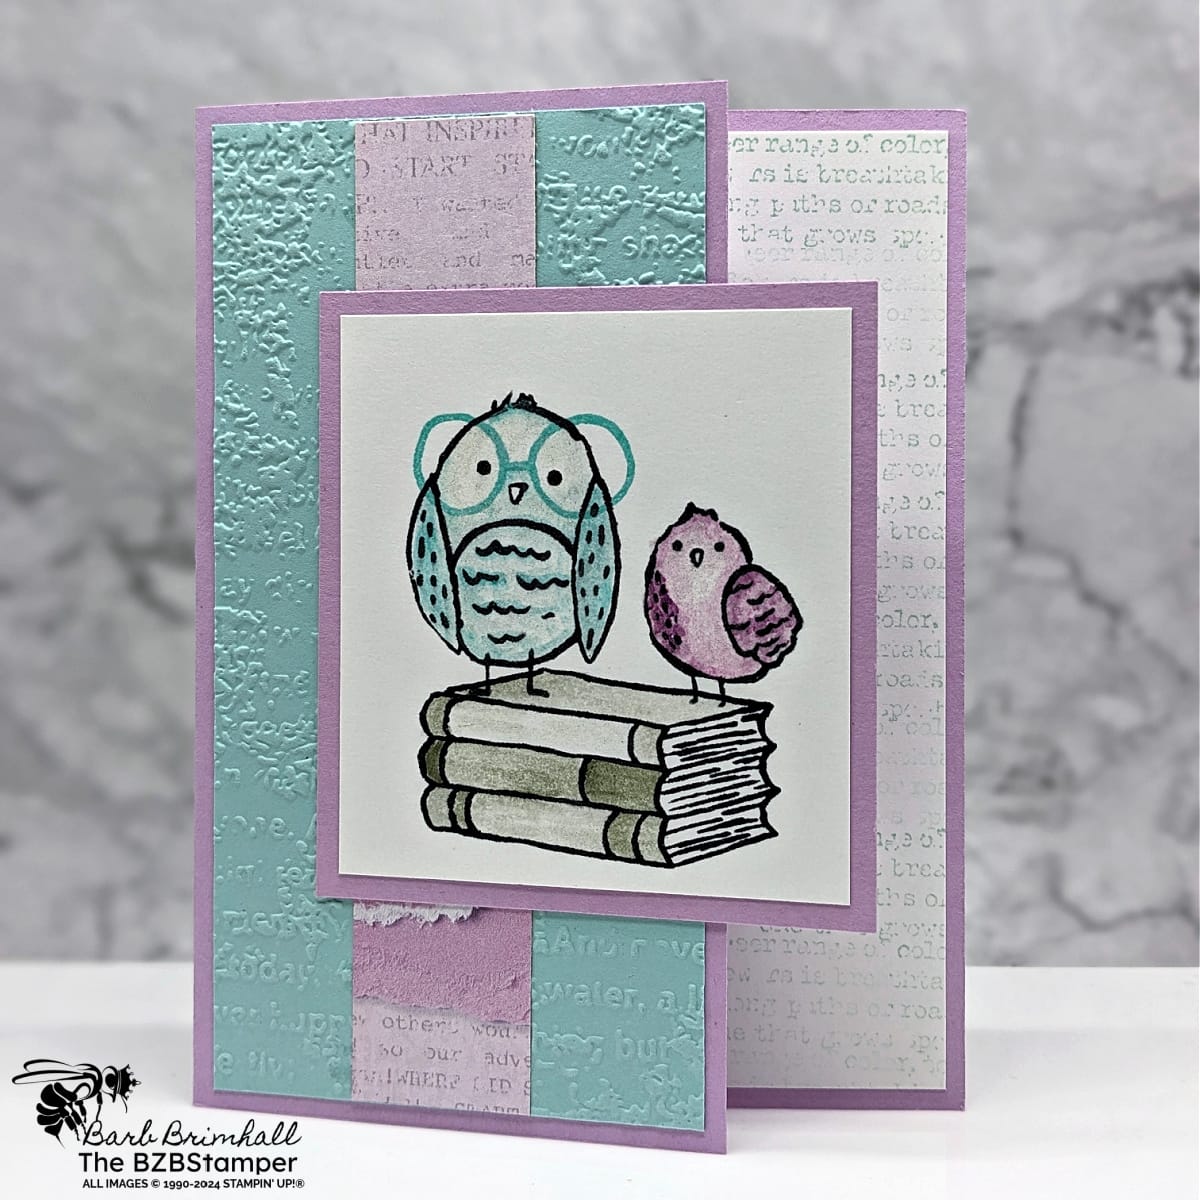 How to Make a Cute Handmade Greeting Card Quickly featuring 2 birds in blue and purple sitting on a pile of green books.  No sentiment but pretty papers and embossed background.